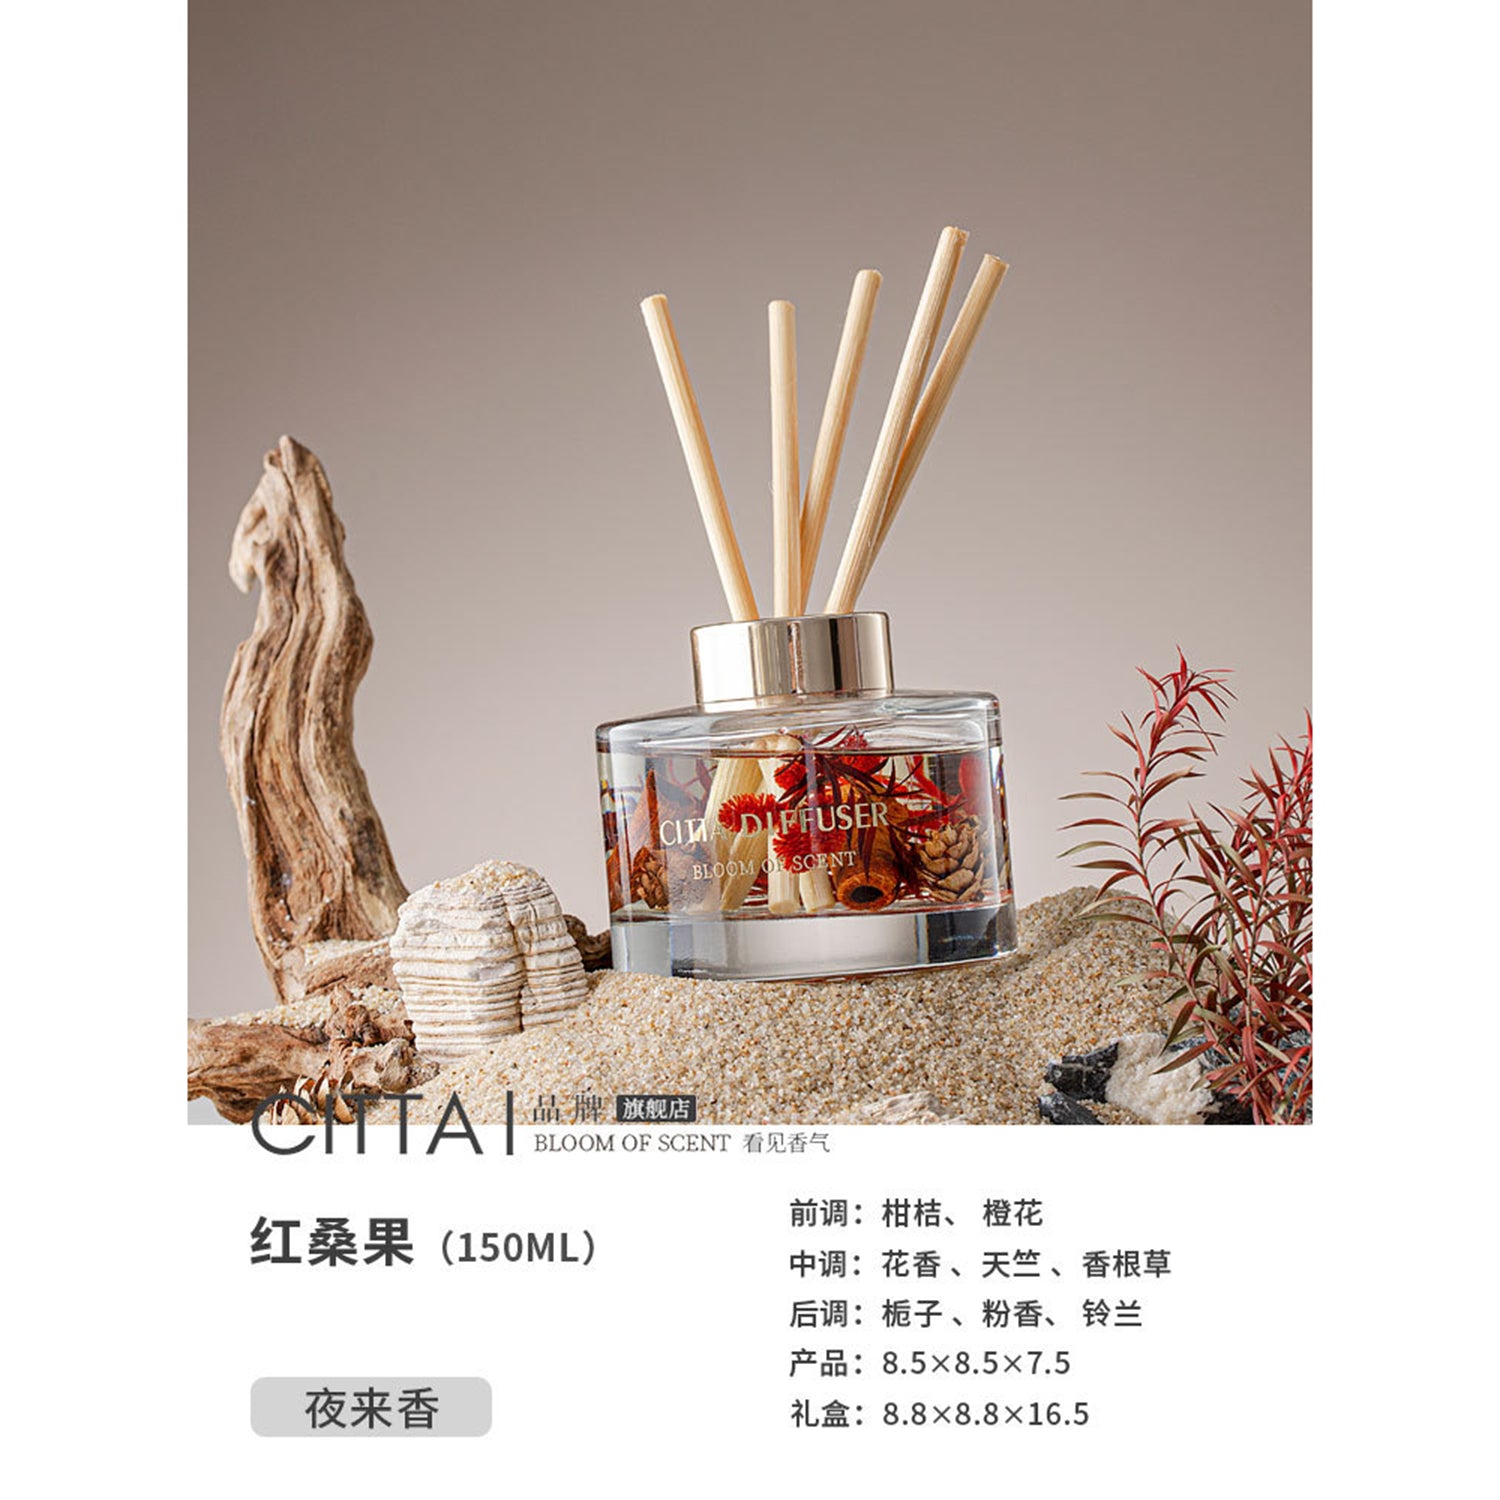 CITTA Fruity Winter Series Reed Diffuser Aromatherapy 150ML Premium Essential Oil with Reed Stick and Dry Fruit Reed Diffuser CITTA Little Red Fruit / Floral Dream 